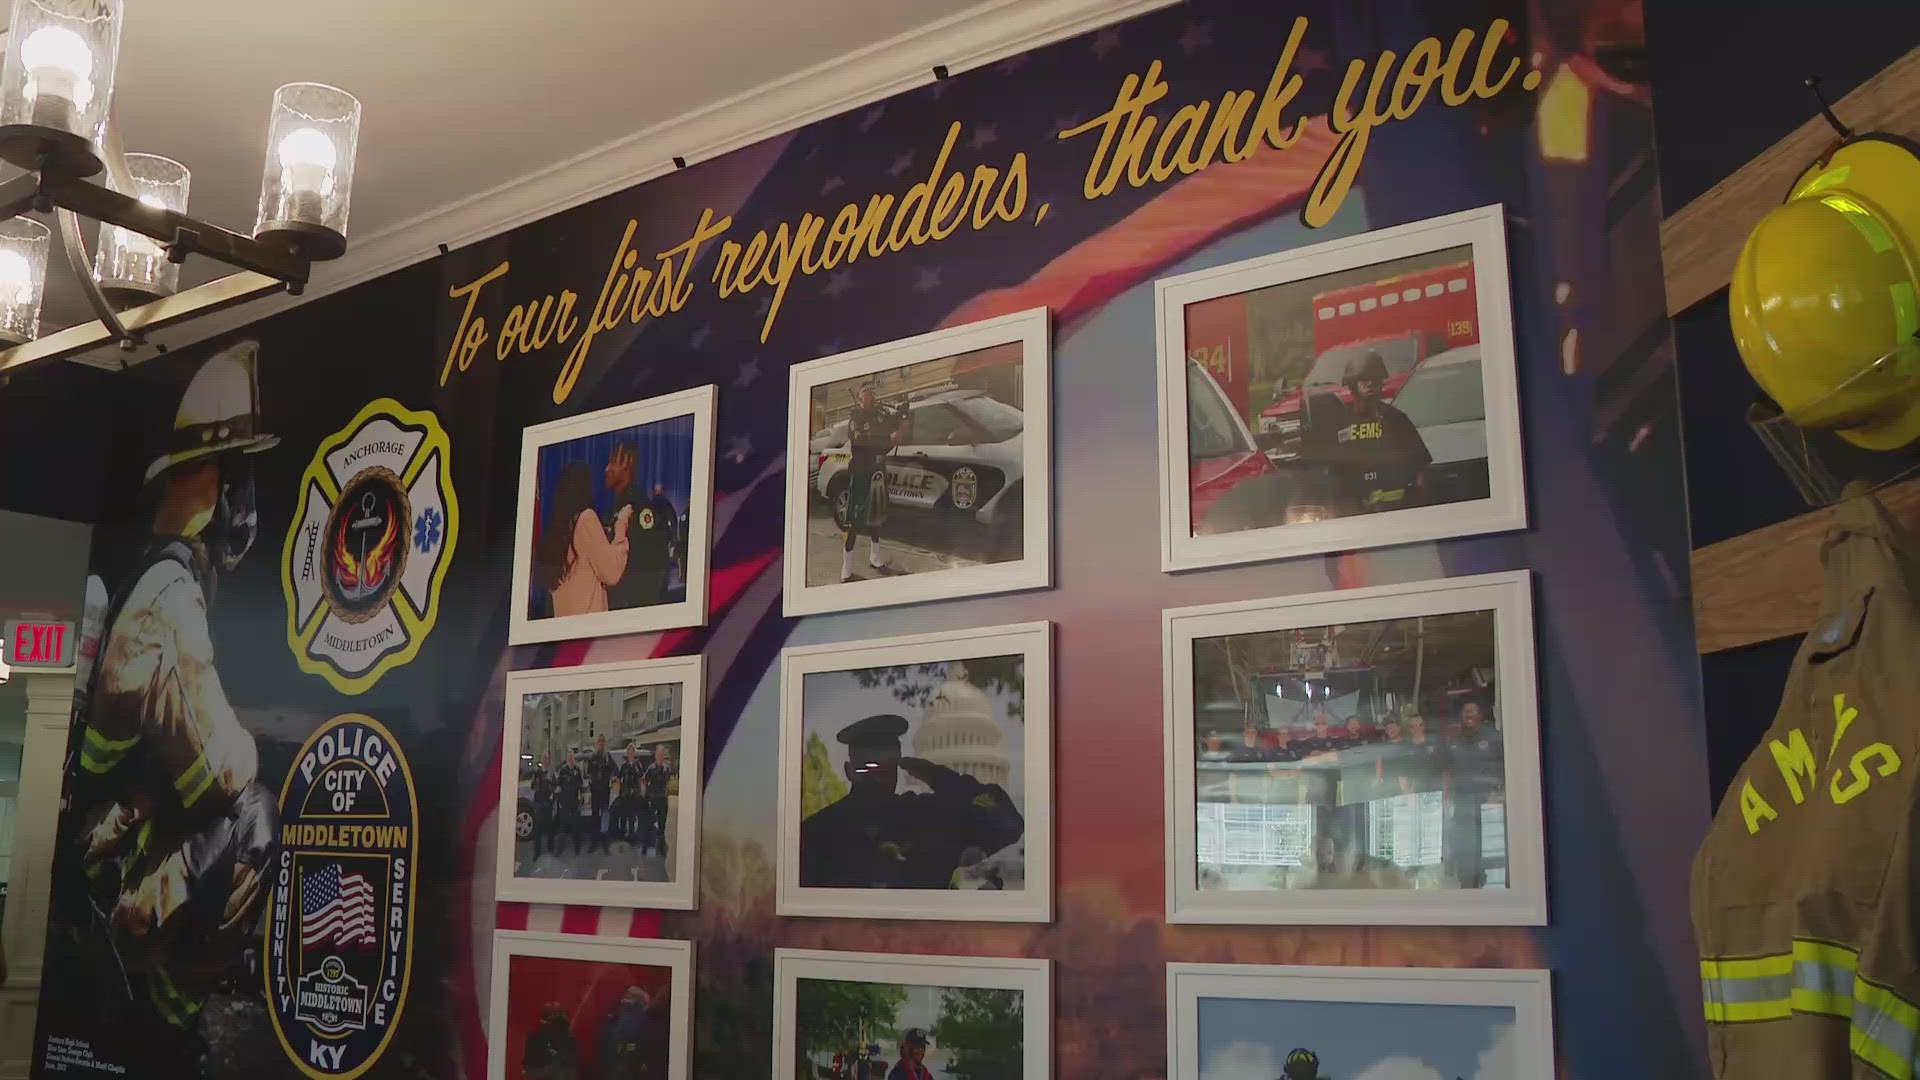 StoryPoint Middletown teamed up with graphic design students at Eastern High School to create a "first responders dedication wall."